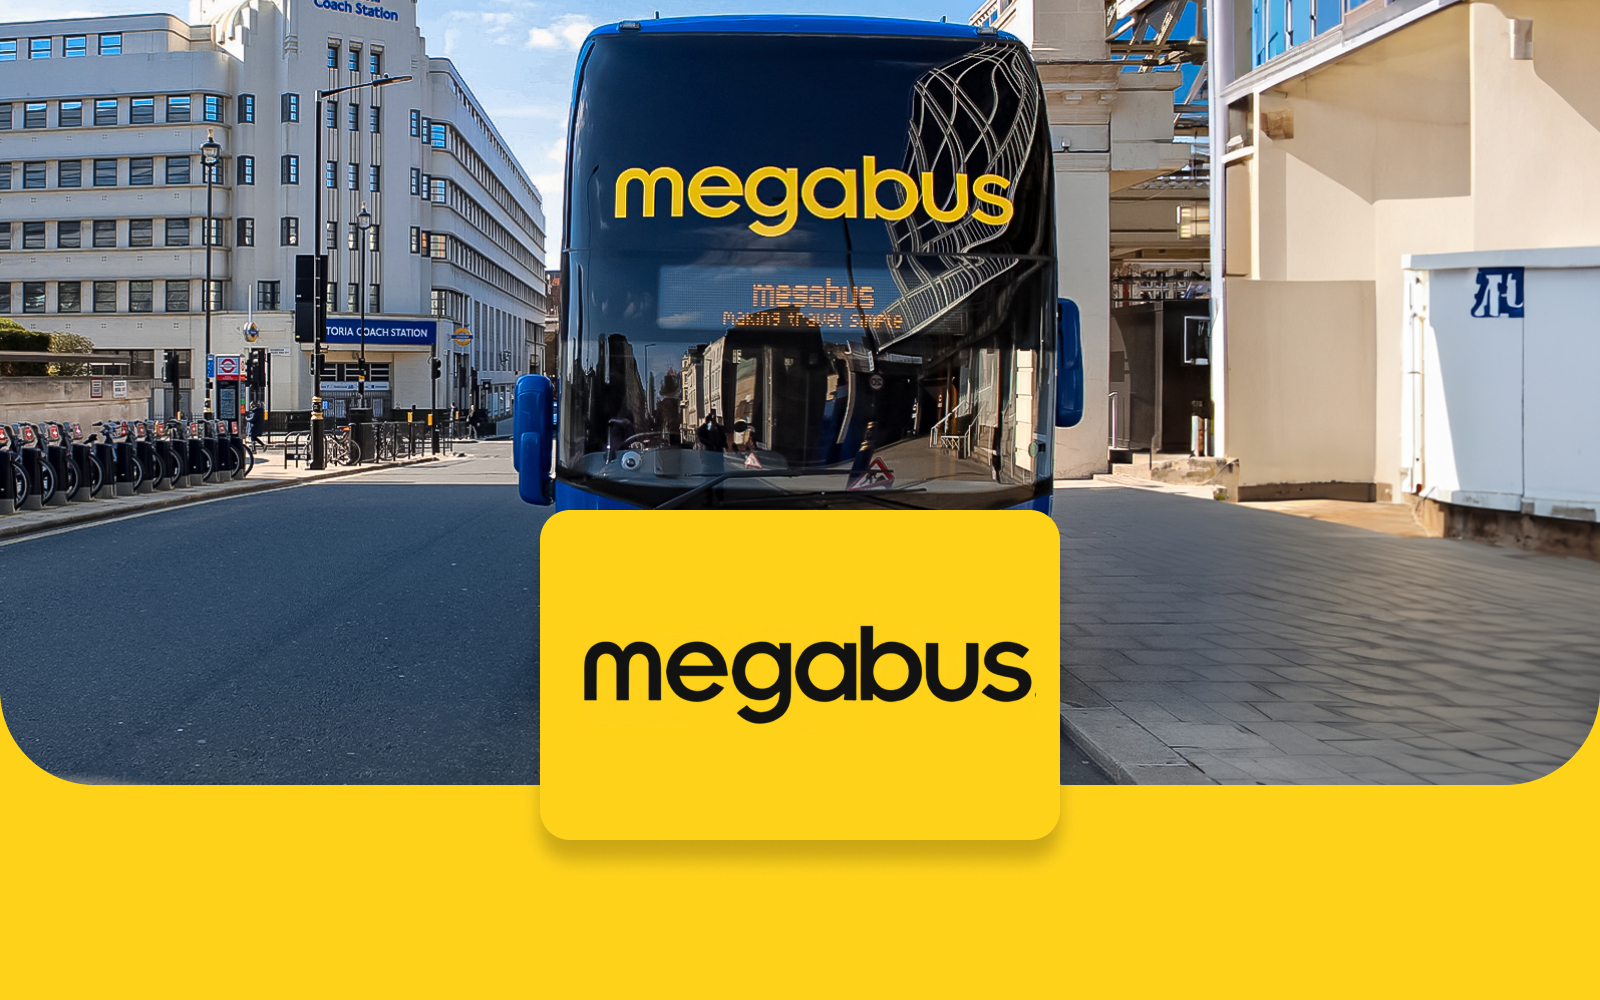 Image of Megabus One-Way Tickets: London Luton Airport to/from London Marble Arch Station